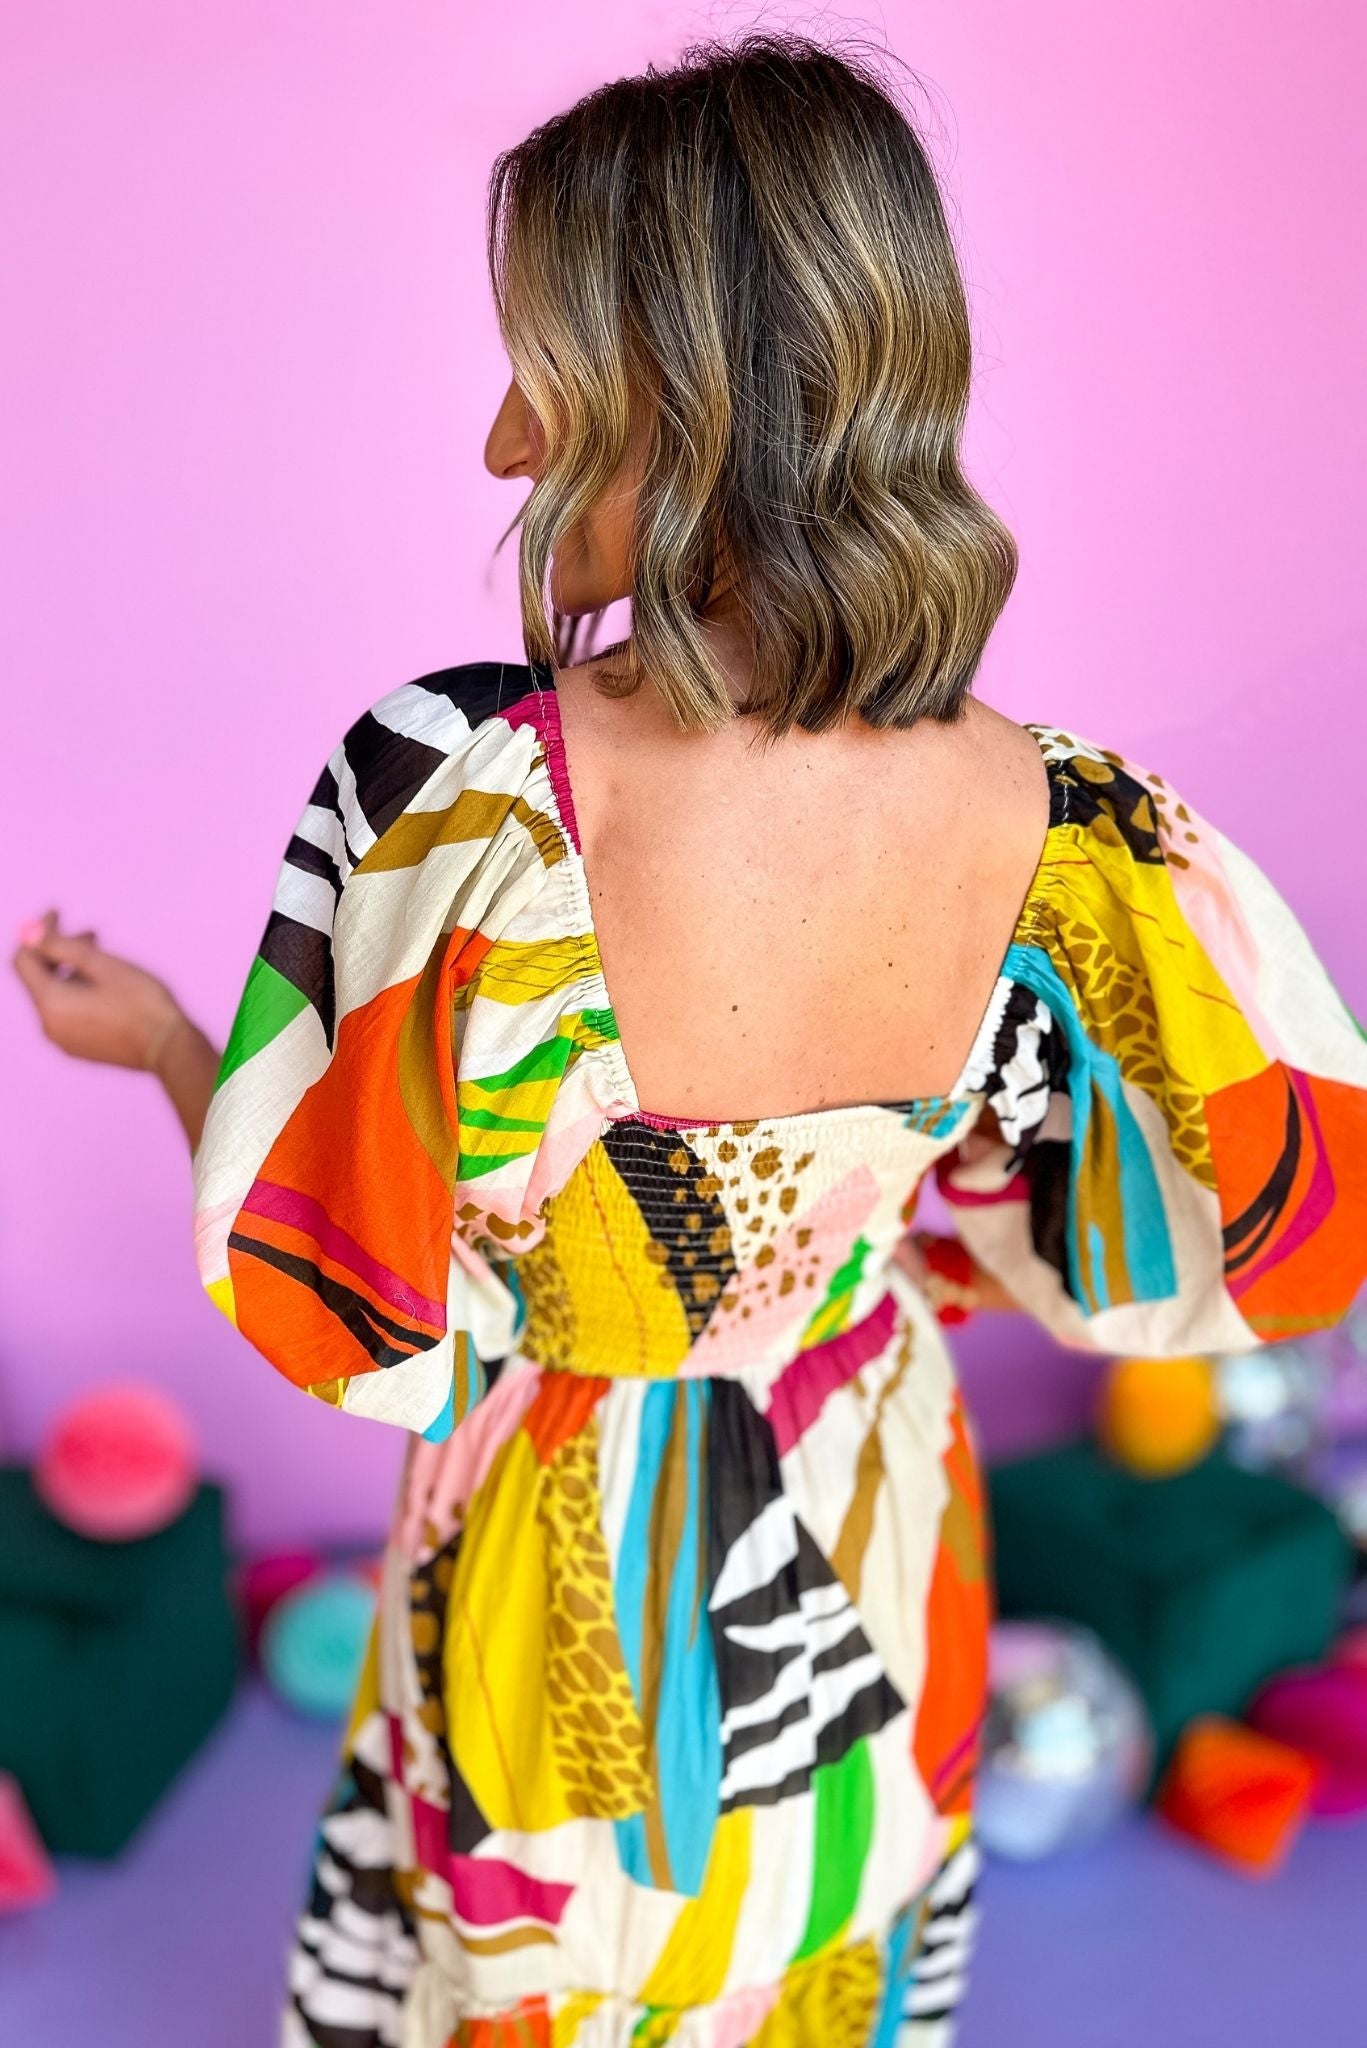 Multi Abstract Printed Smocked Bodice Puff Sleeved Midi Dress, midi dress, resort wear, spring style, smocked bodice, puff sleeve, shop style your senses by mallory fitzsimmons